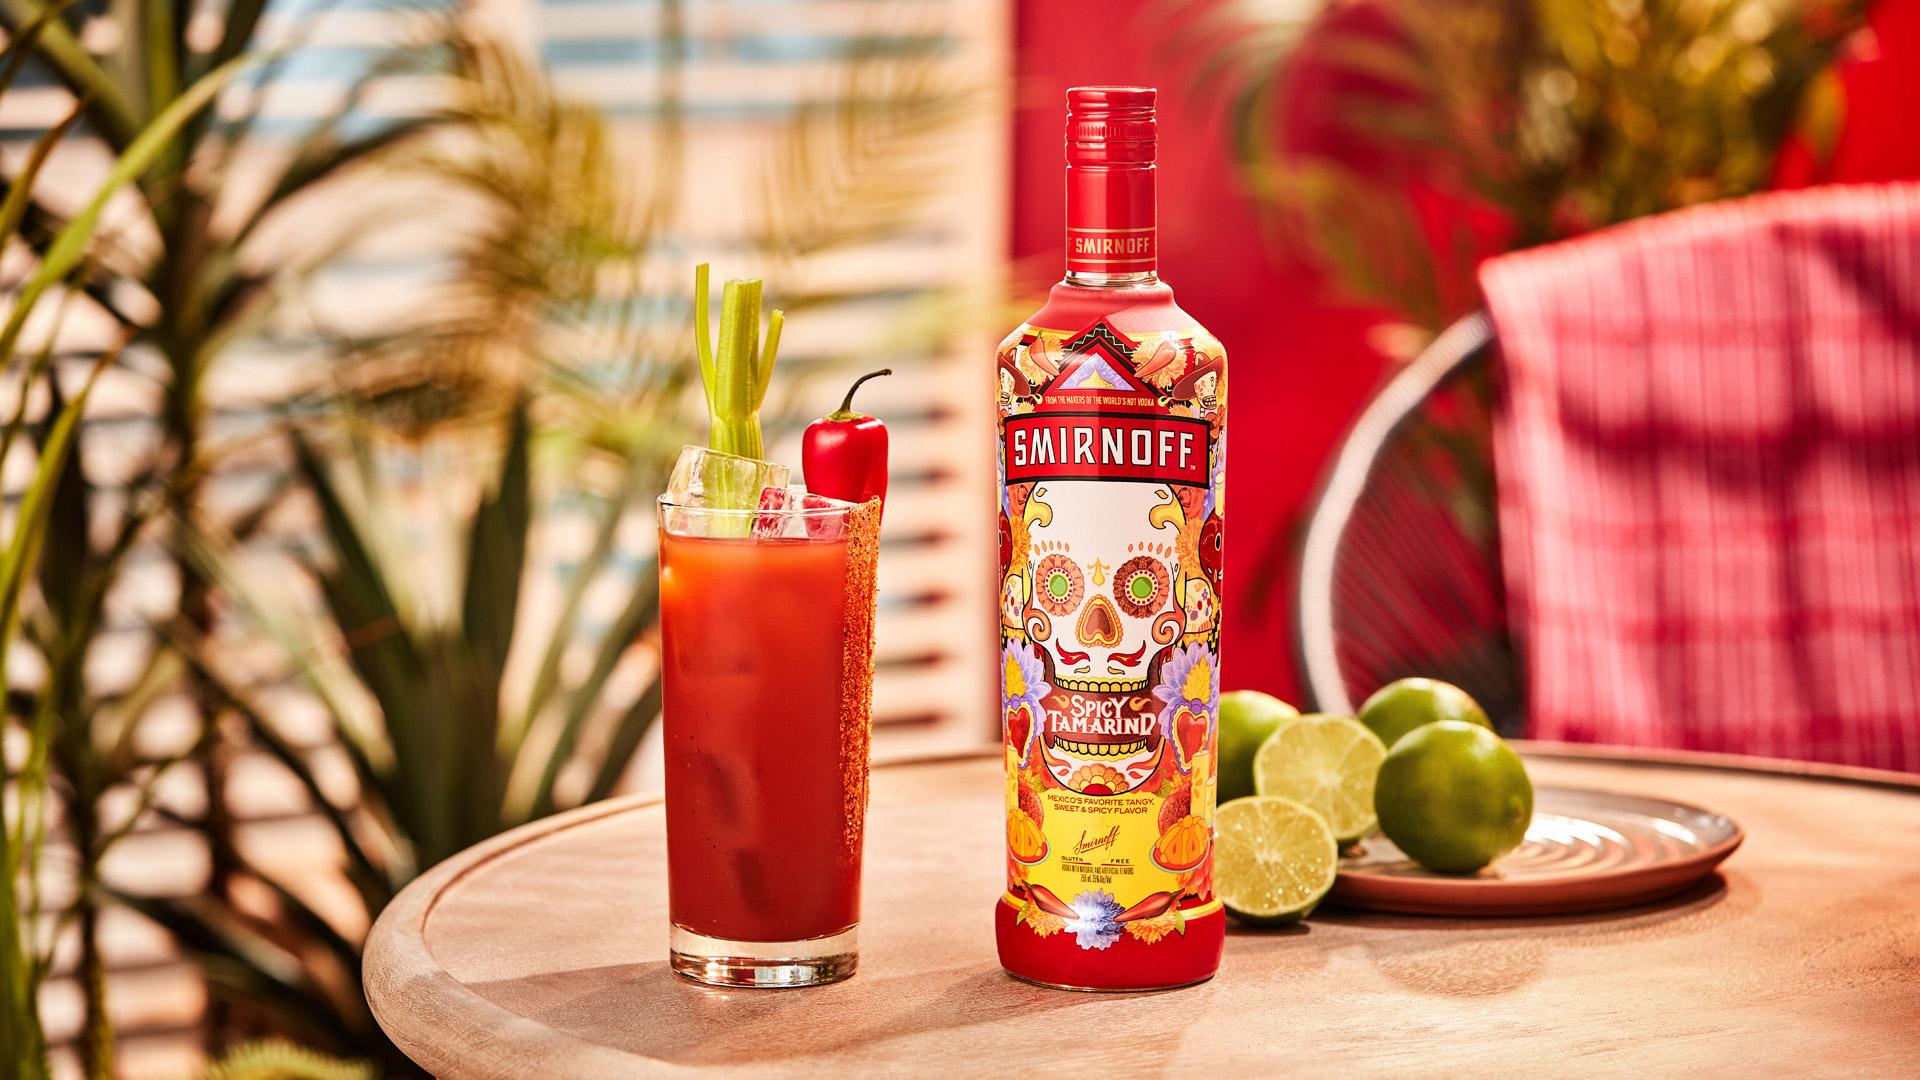 Smirnoff Spicy Tamarind vodka bottle alongside a red colored Spicy Bloody cocktail with spicy seasoning and celery garnish. 